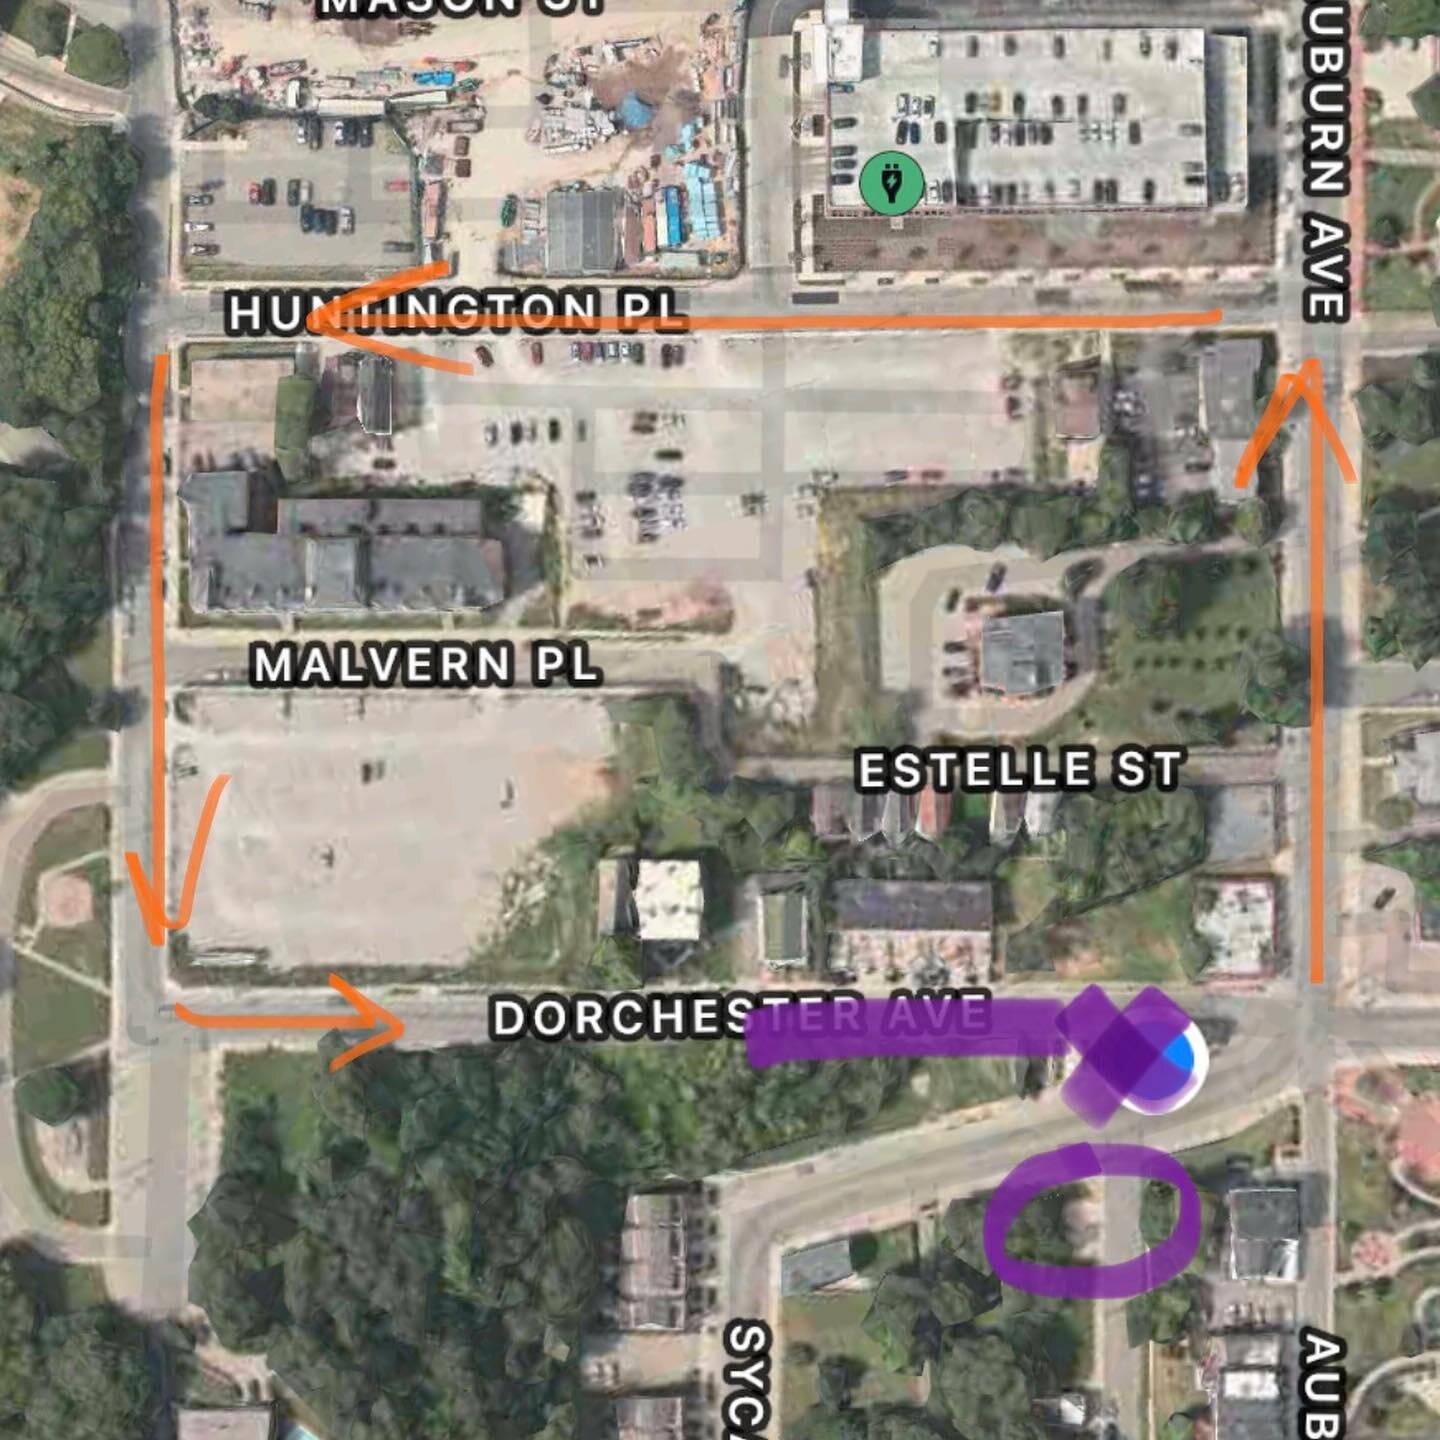 short Dorchester will be closed to thru traffic for a short amount of time due to construction, but no worries! You can still park here by taking a detour. There is also a lot across the way on the corner of Walker Street and Sycamore! Street parking